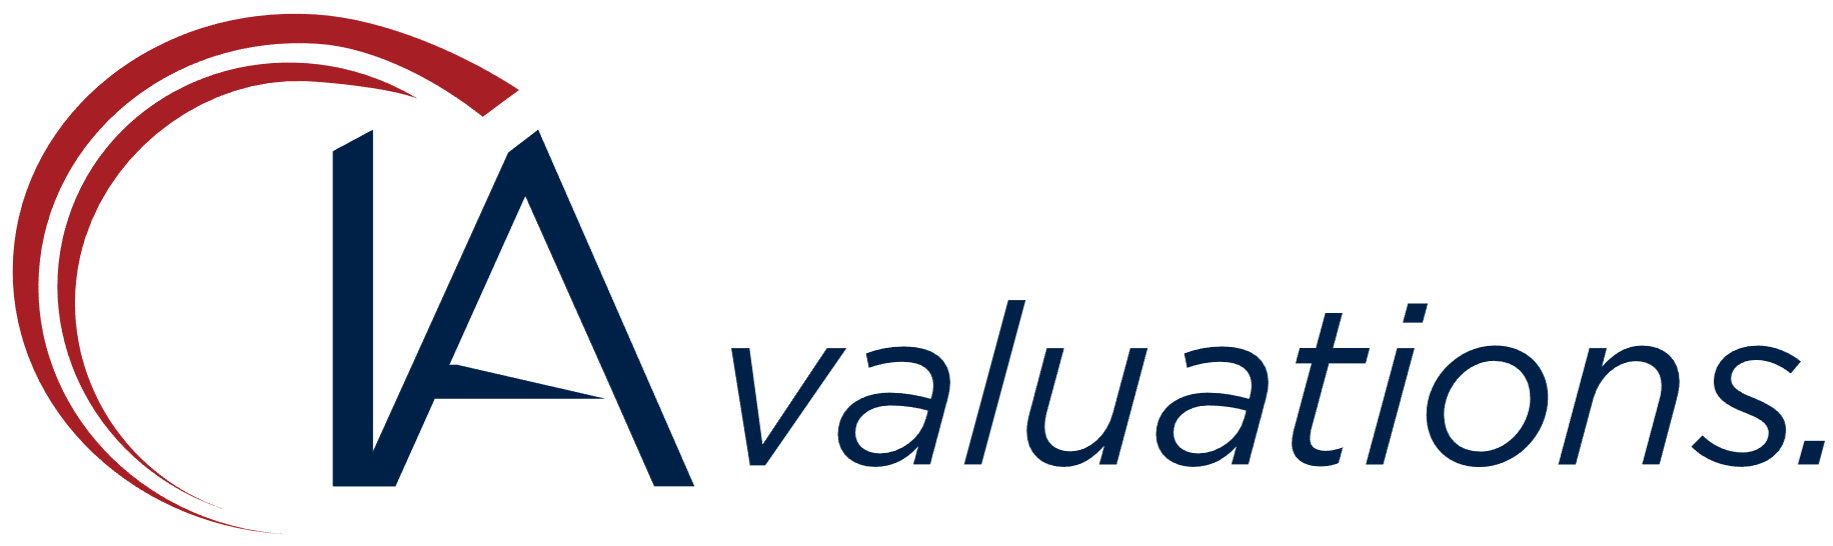 IA Valuations logo full color (1).png